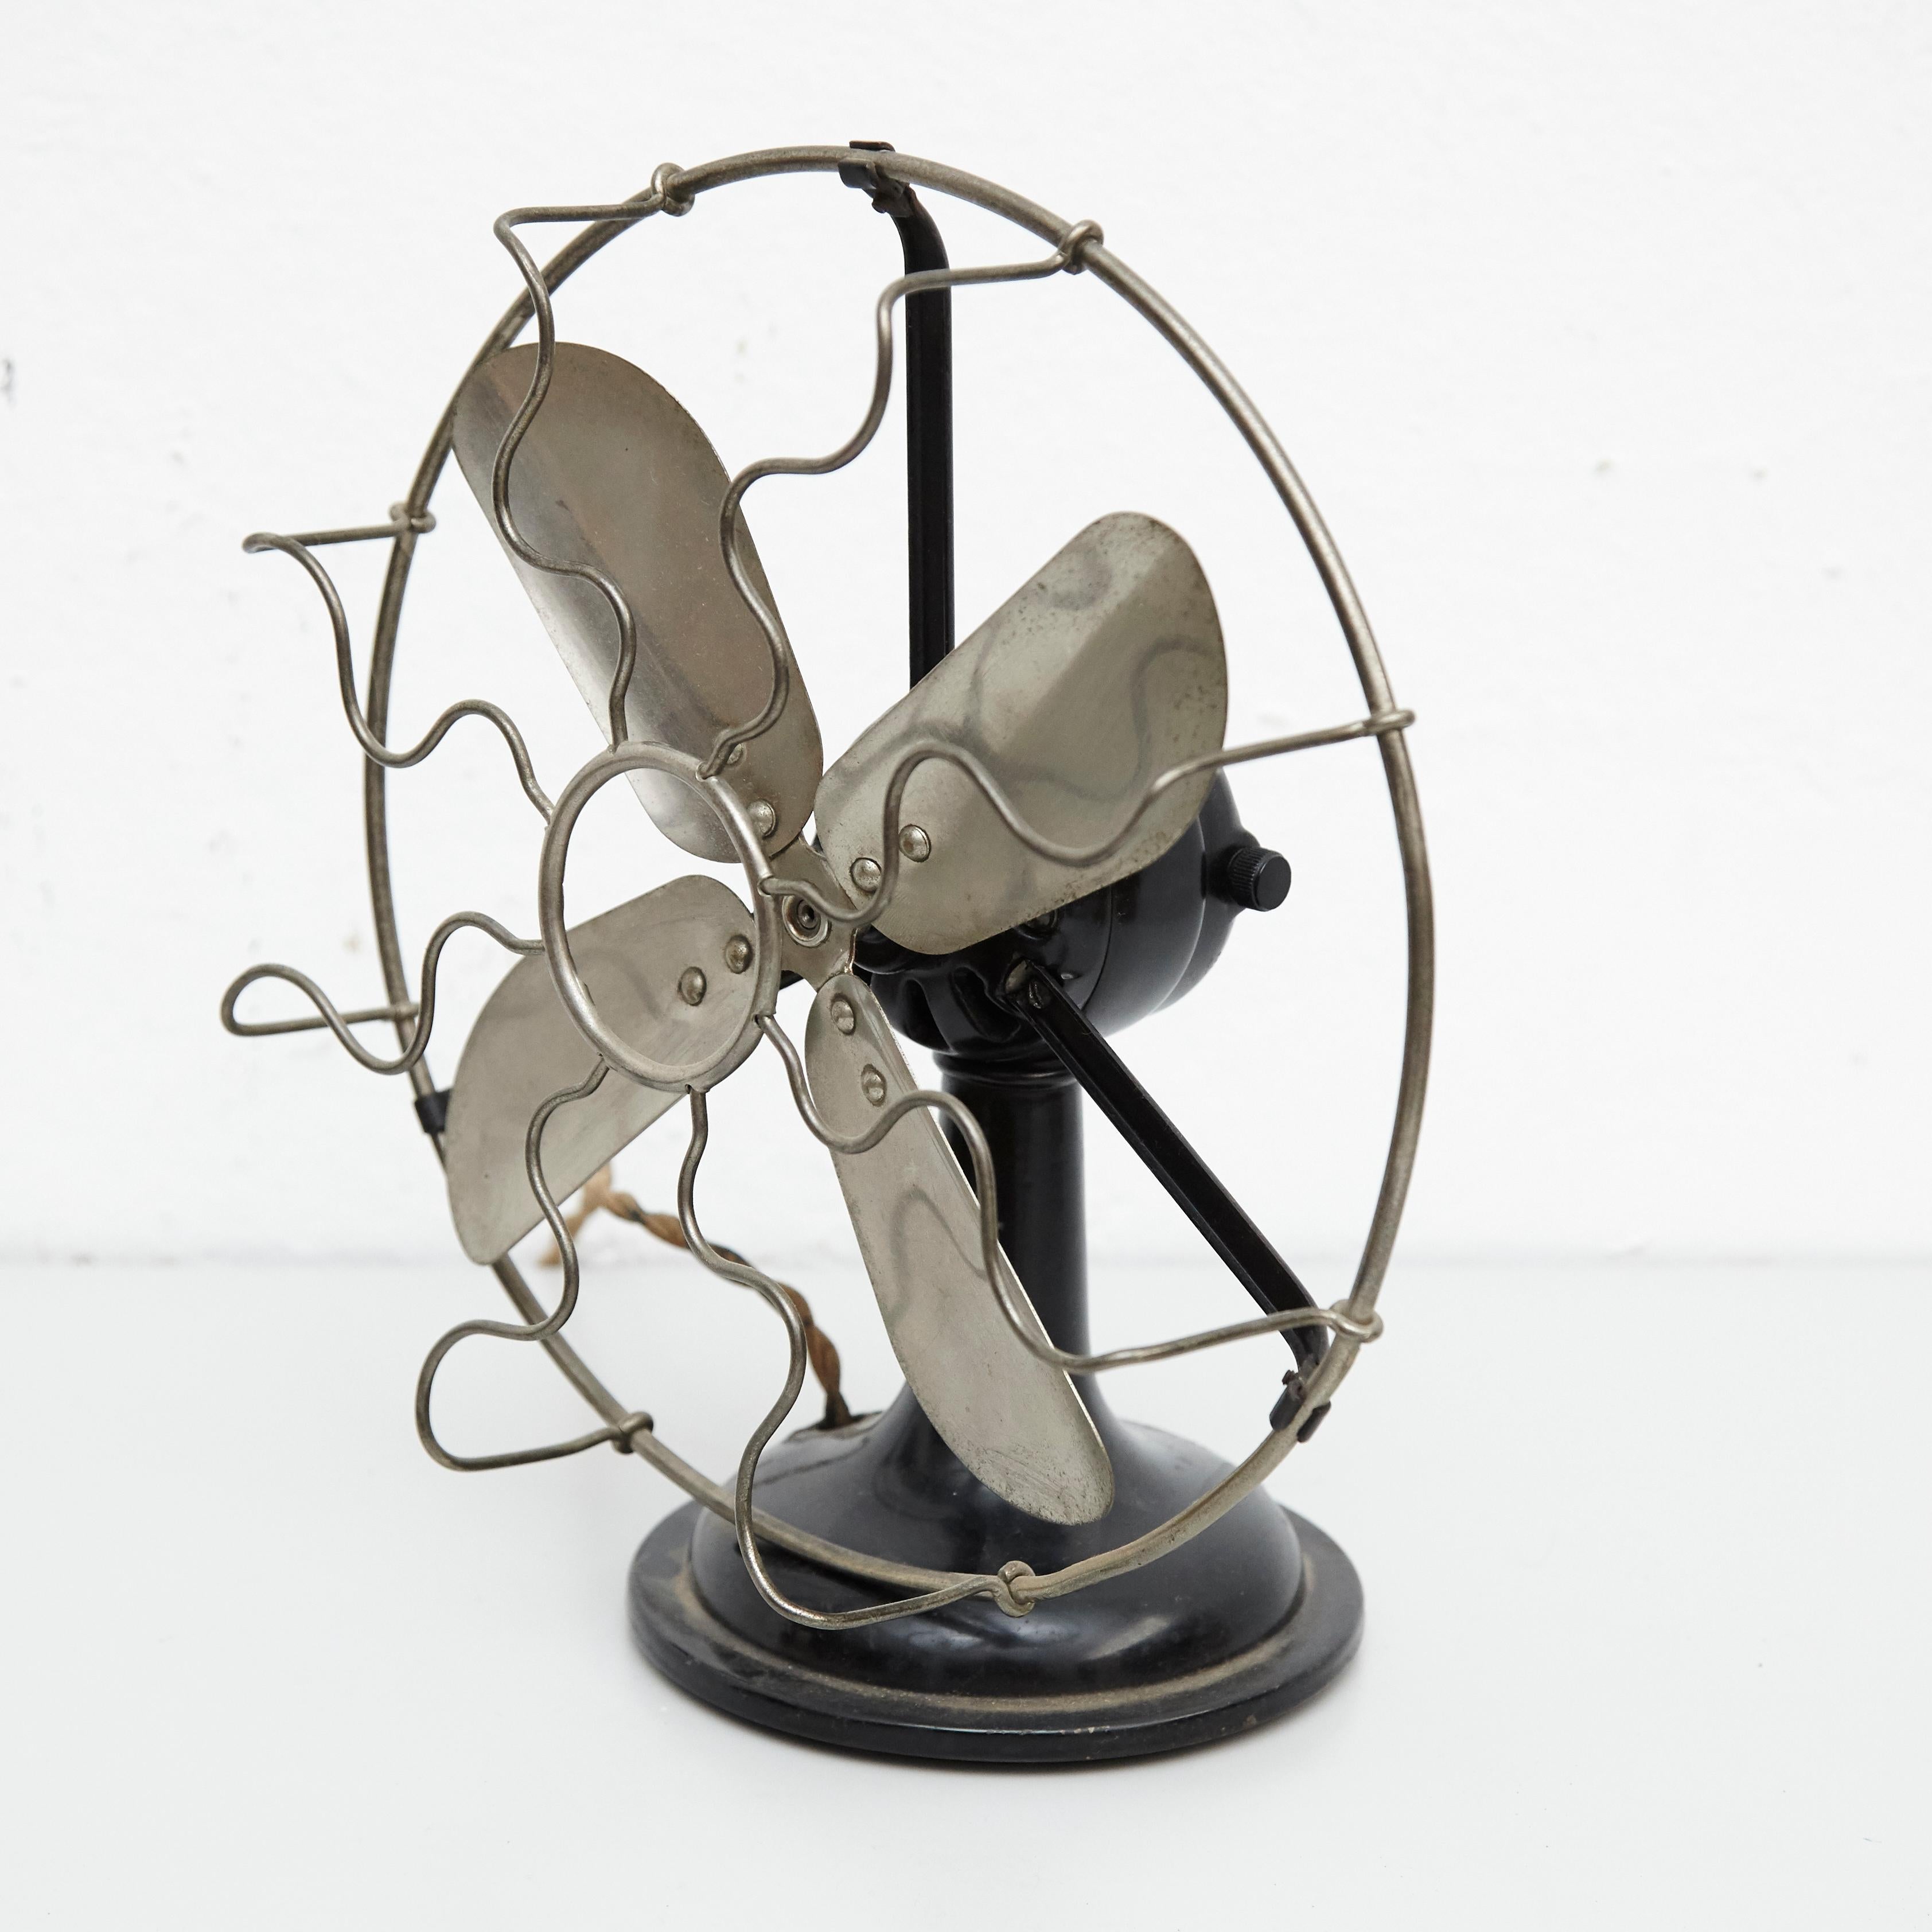 Marelli fan.
Manufactured by Marelli, Italy, circa 1940.

In original condition, with minor wear consistent of age and use, preserving a beautiful patina.
The mechanical condition of the fan hasn't been